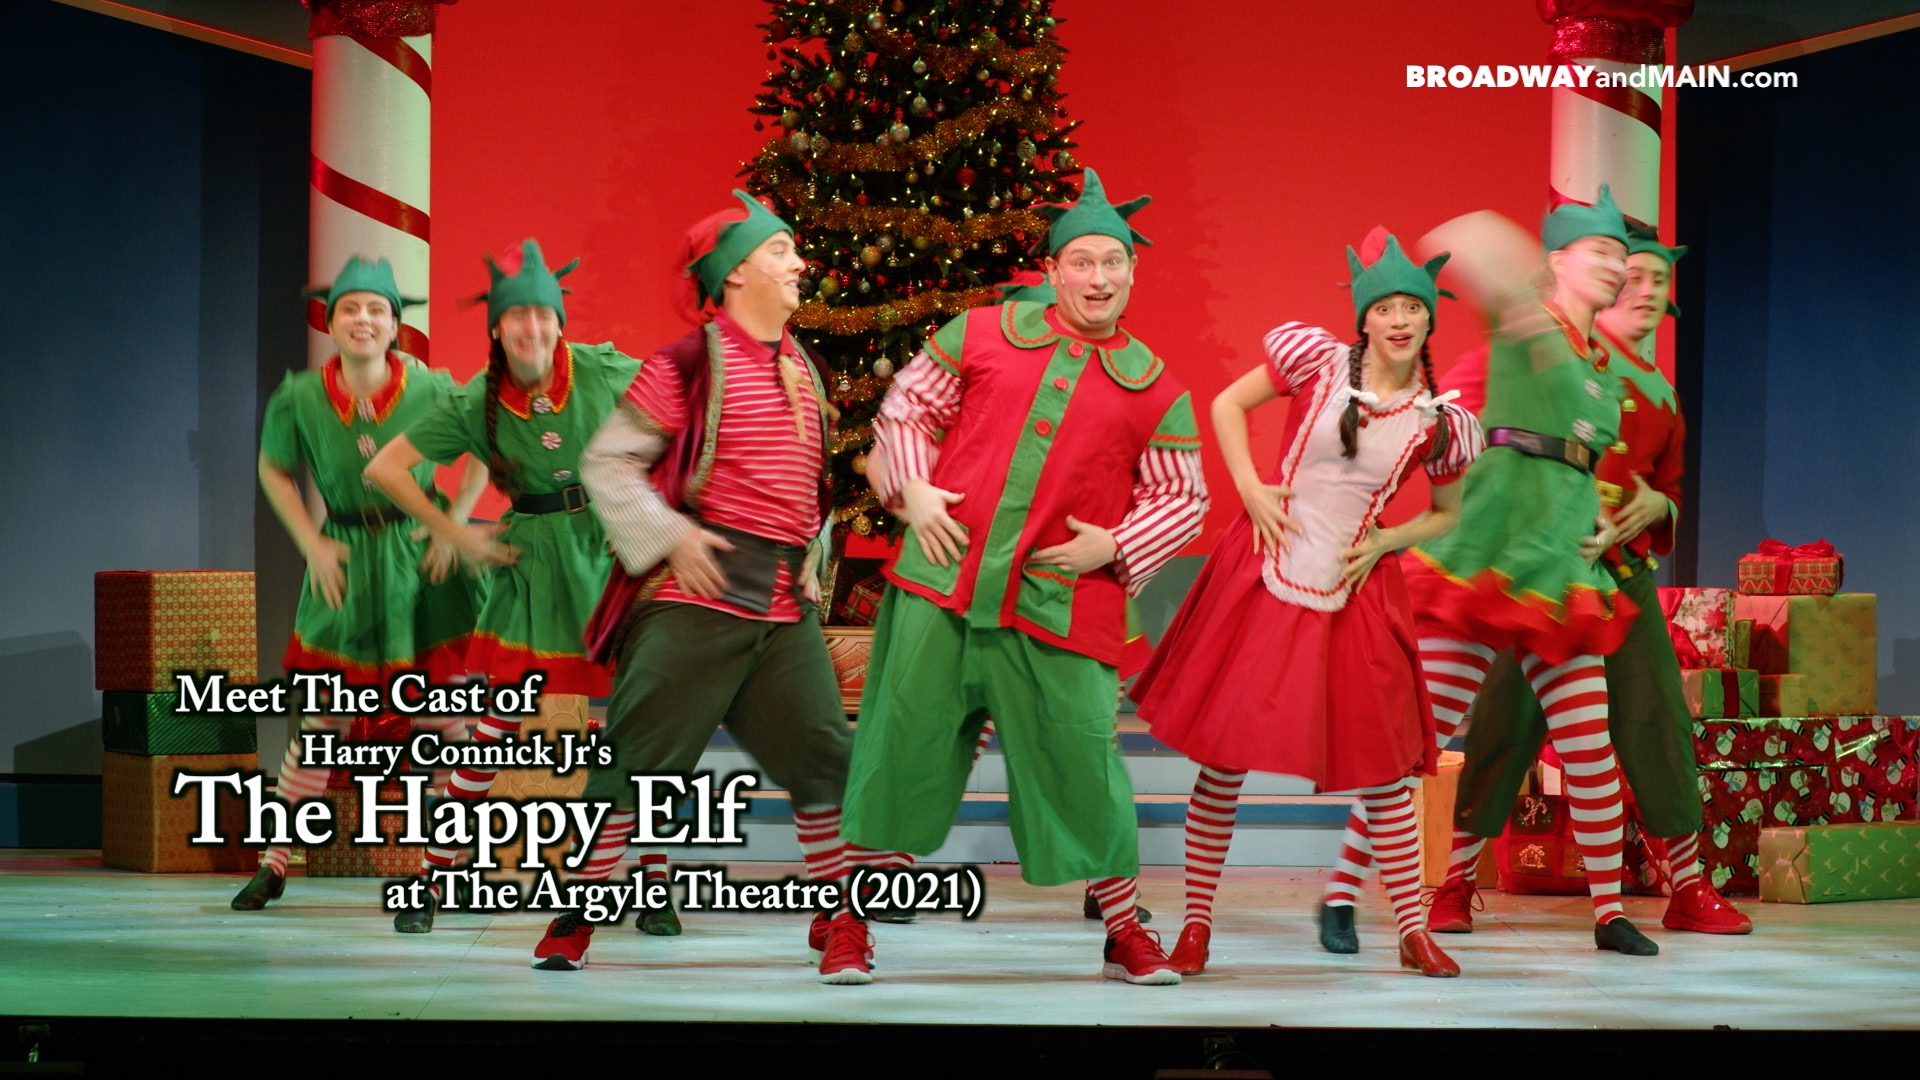 Meet The Cast of Harry Connick Jr's The Happy Elf at The Argyle Theatre